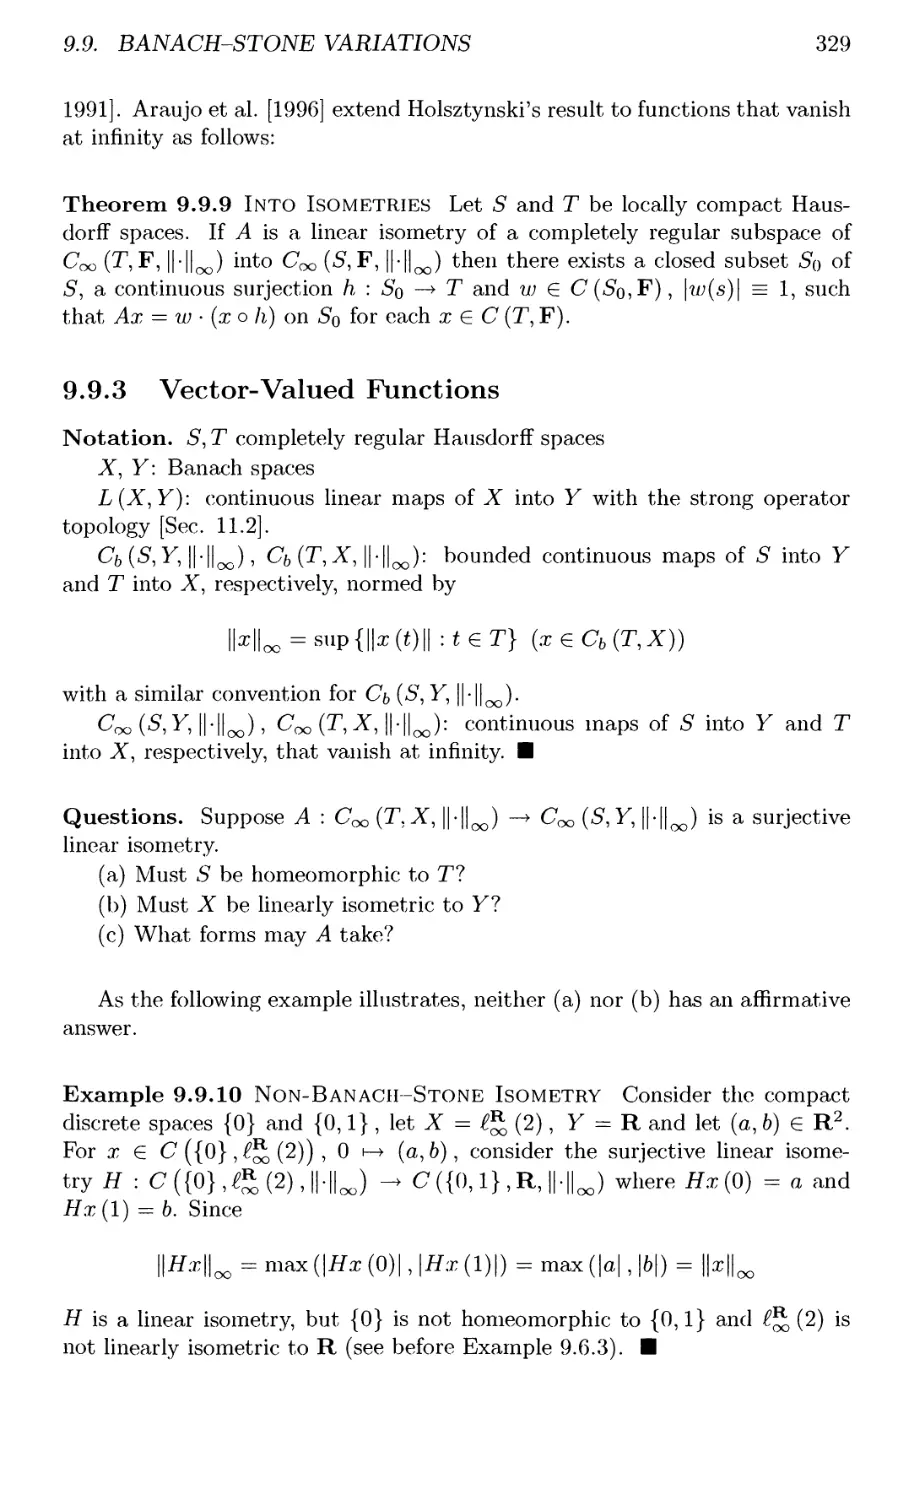 9.9.3 Vector-Valued Functions